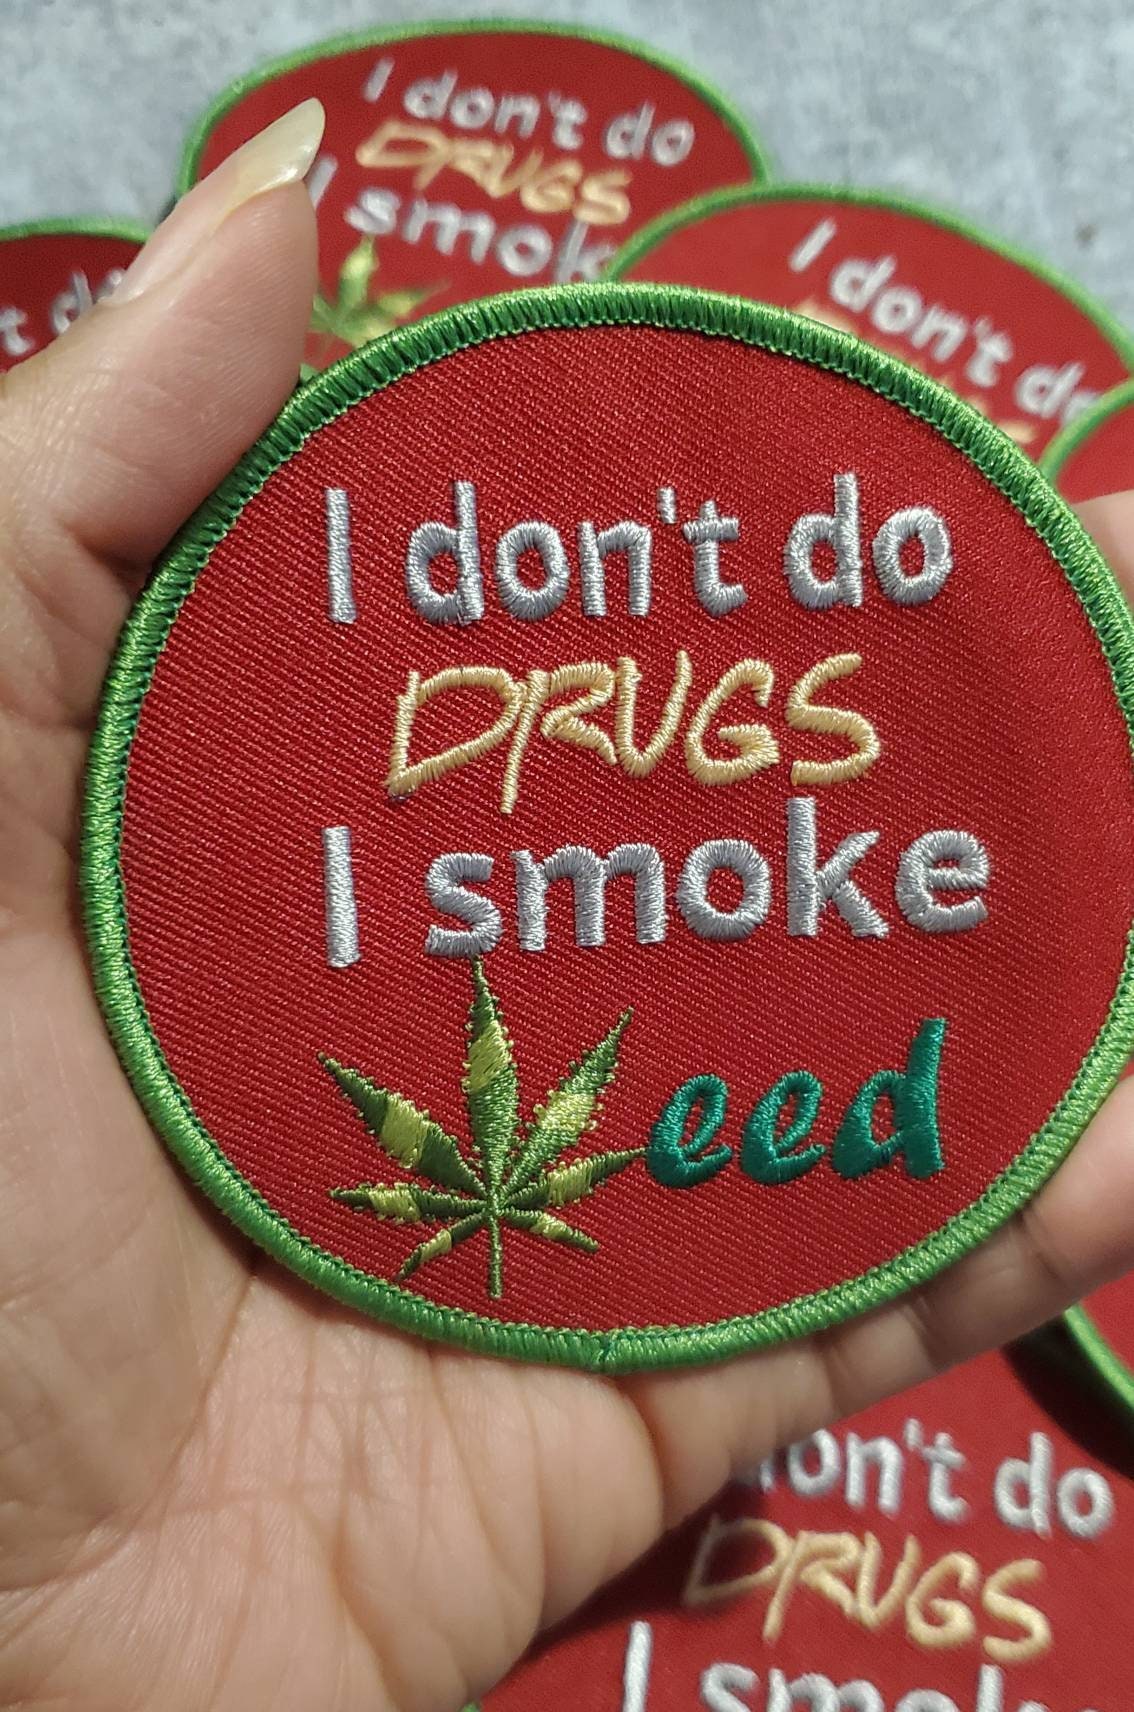 NEW, Limited Edition, "I Don't Do Drugs, I Smoke Weed" Iron-On Embroidered Patch, Patches for Weed Lovers, Cannibas Badge, Size 3"